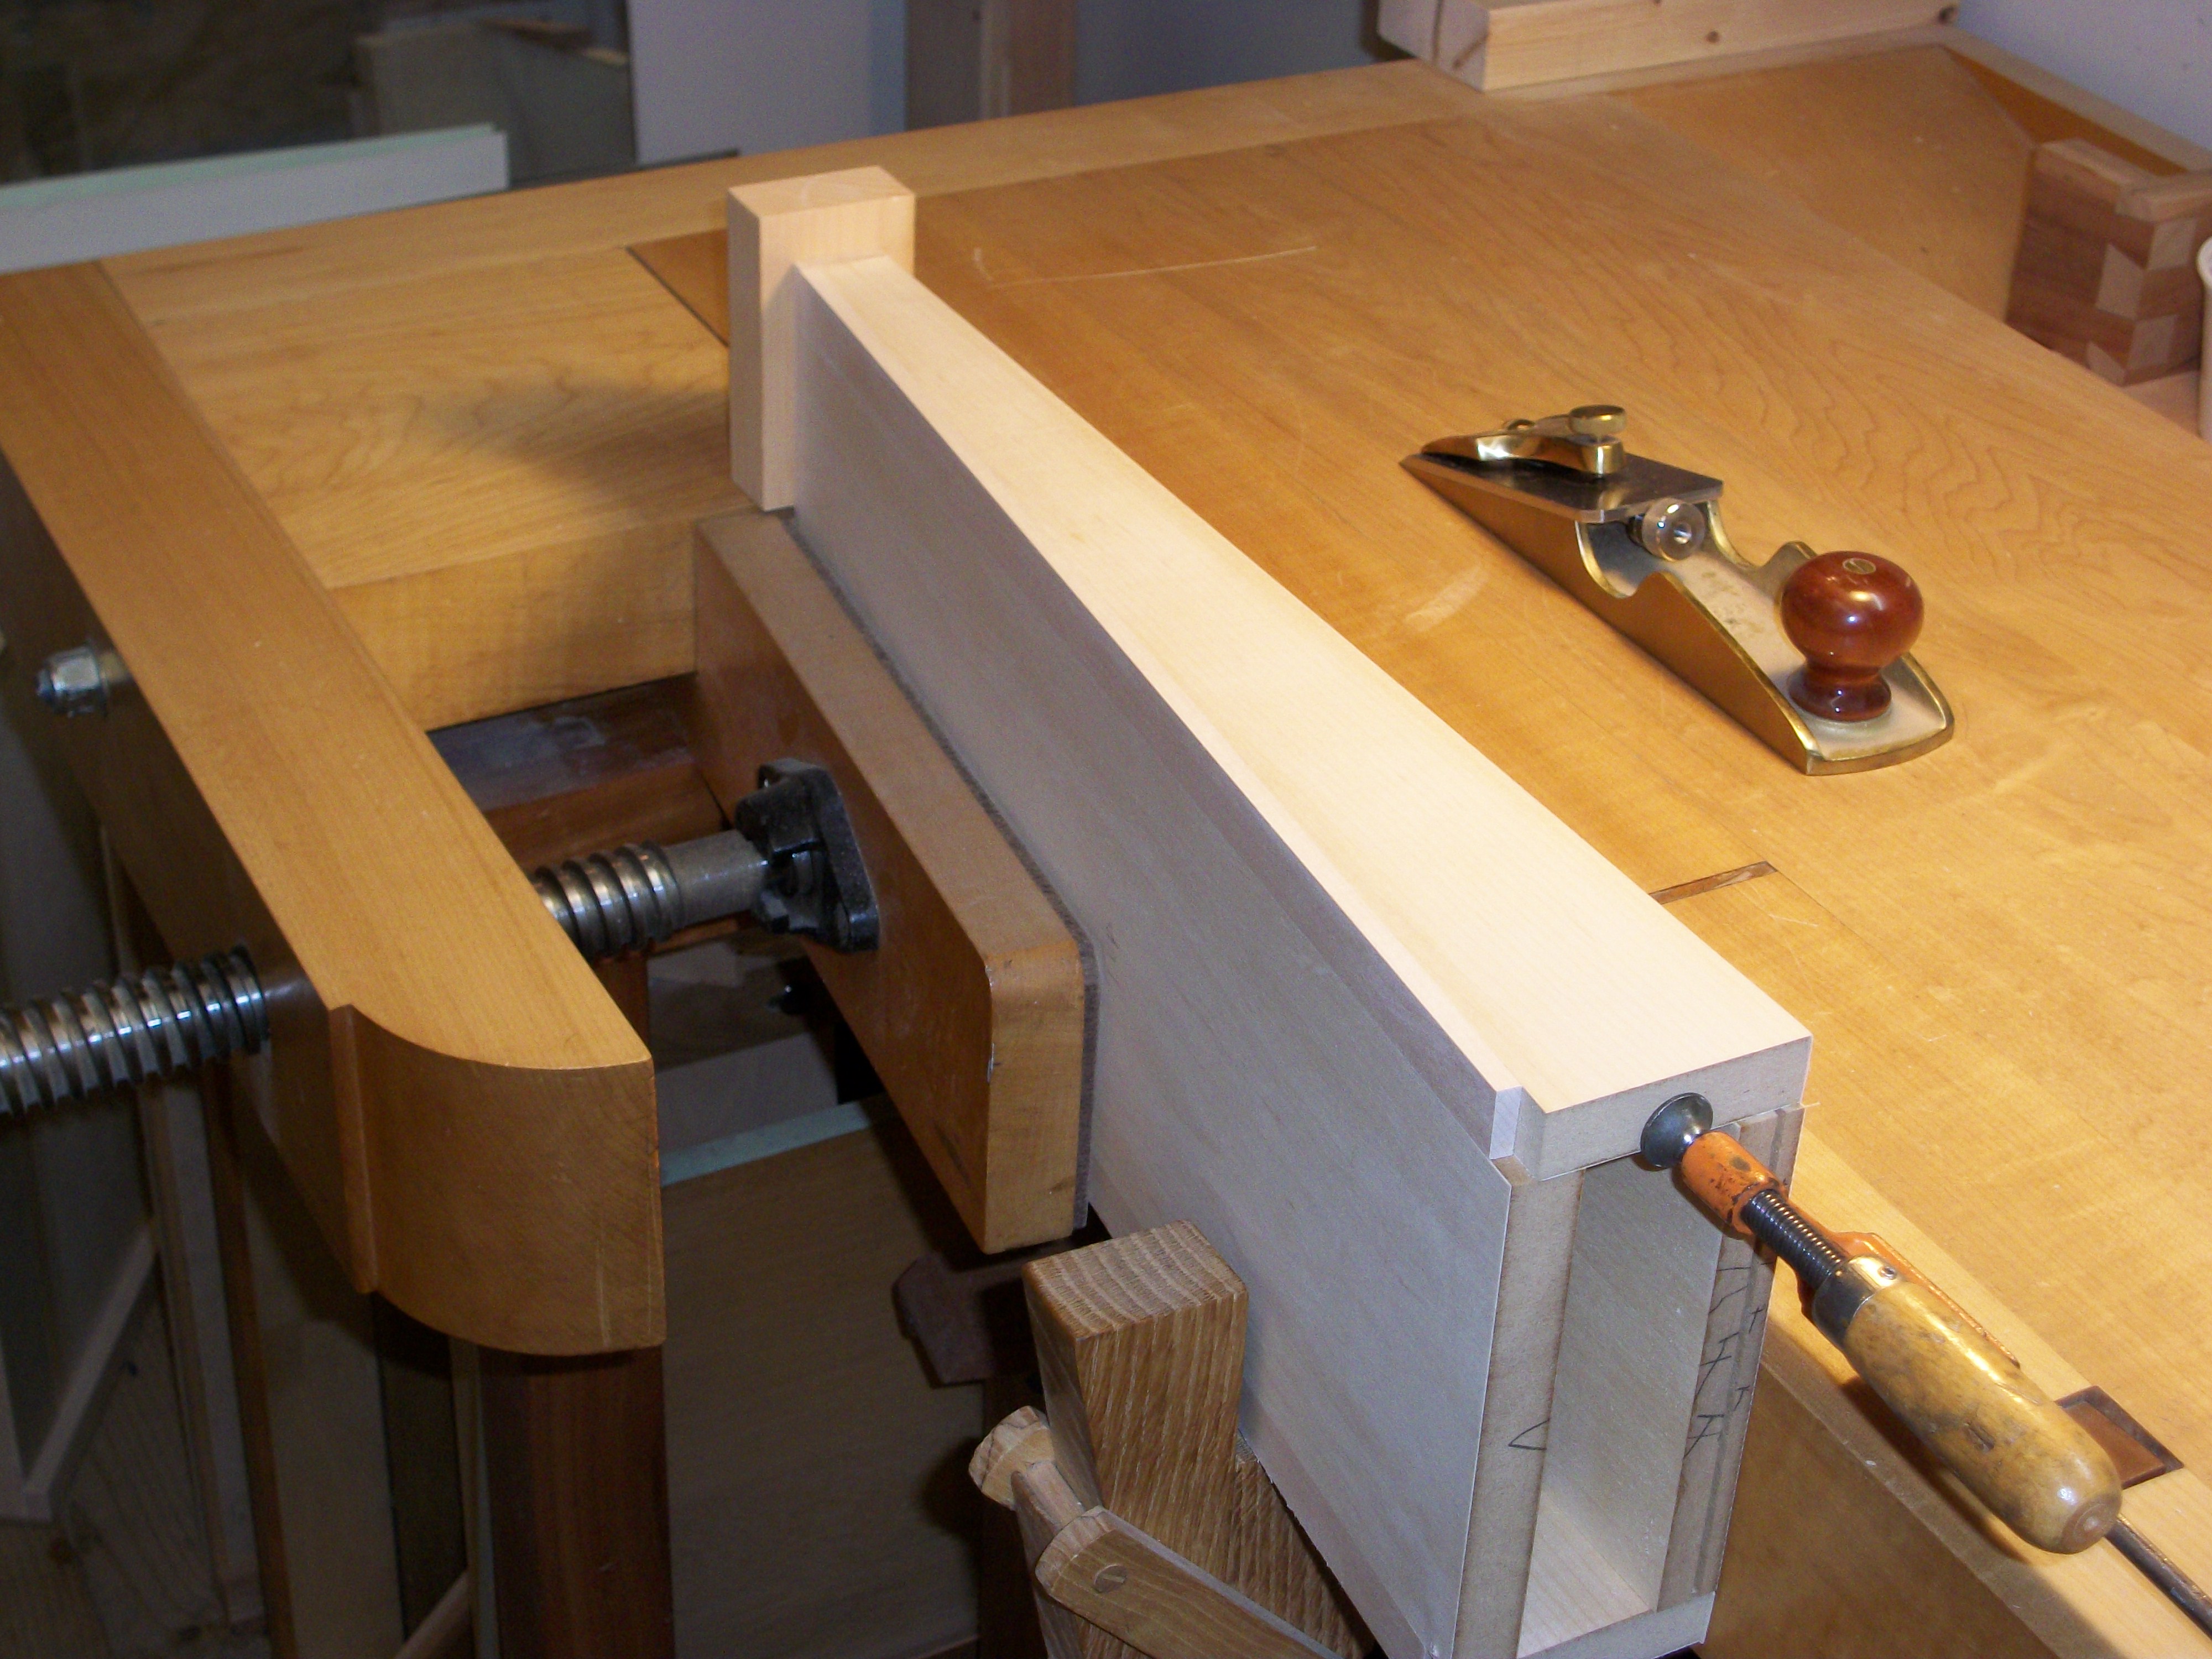  DIY Woodworking Bench Tail Vise Download woodworking bunk bed plans